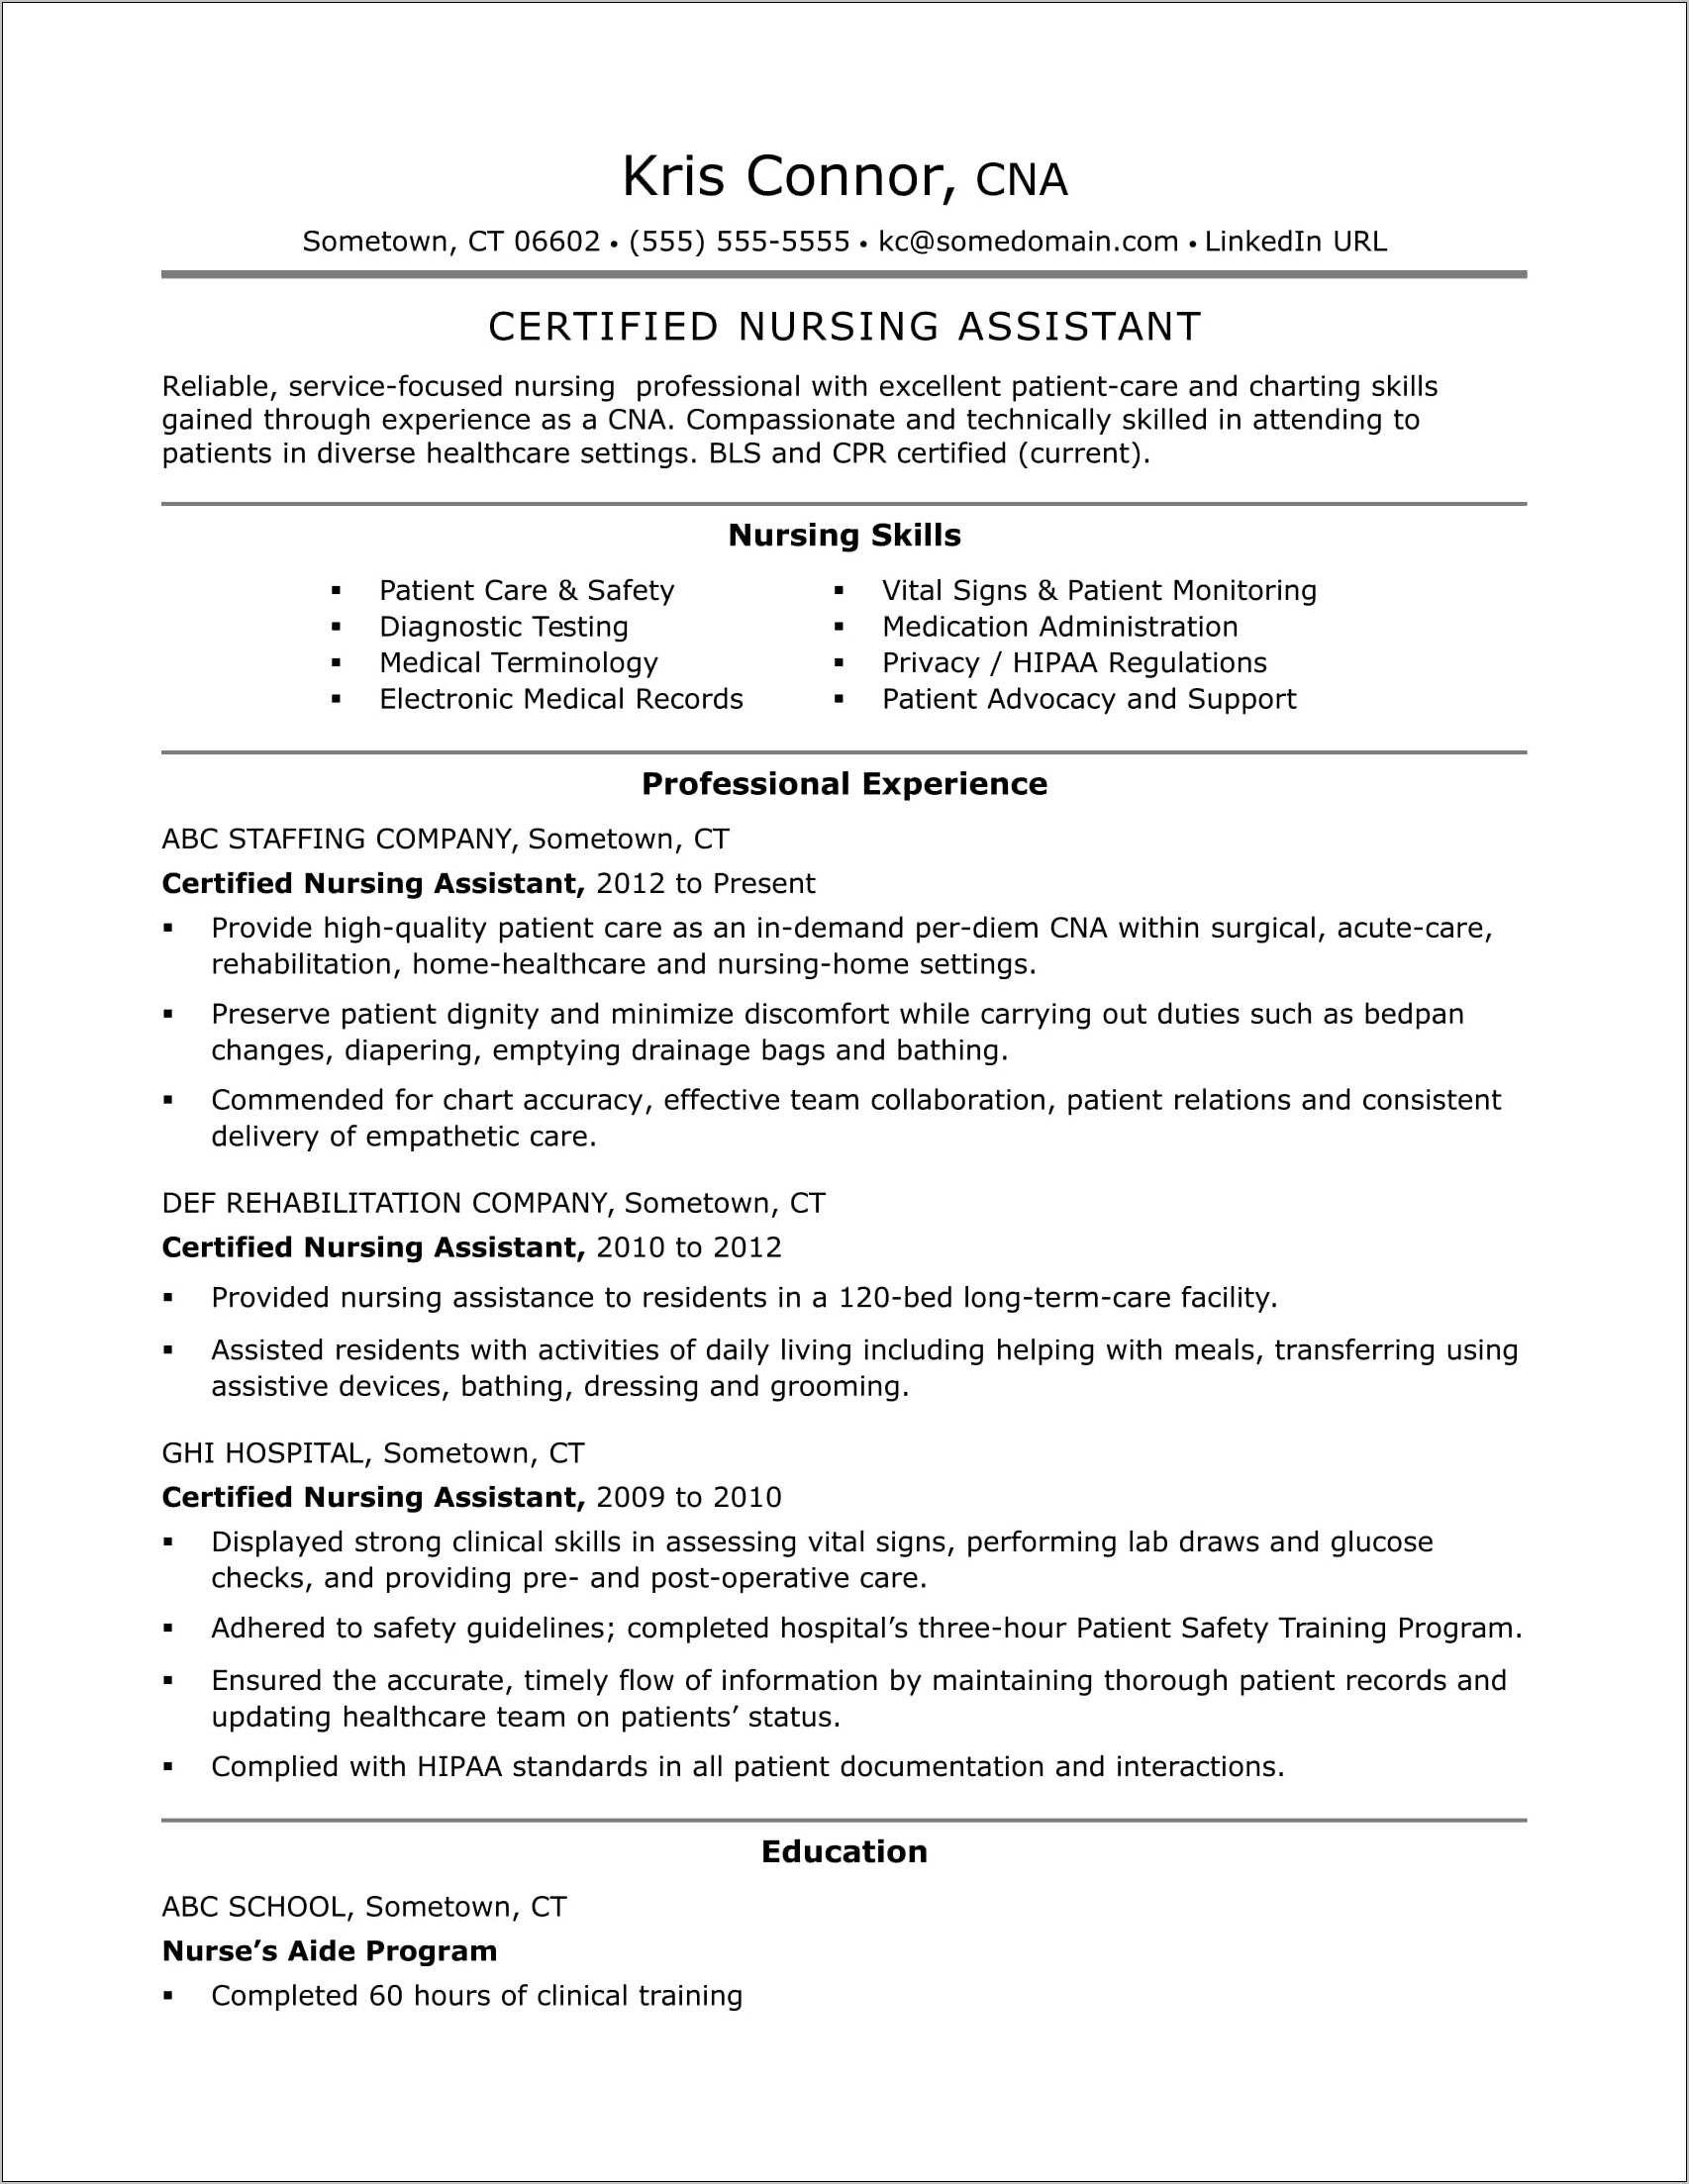 Resume Summary Examples For Medical Field